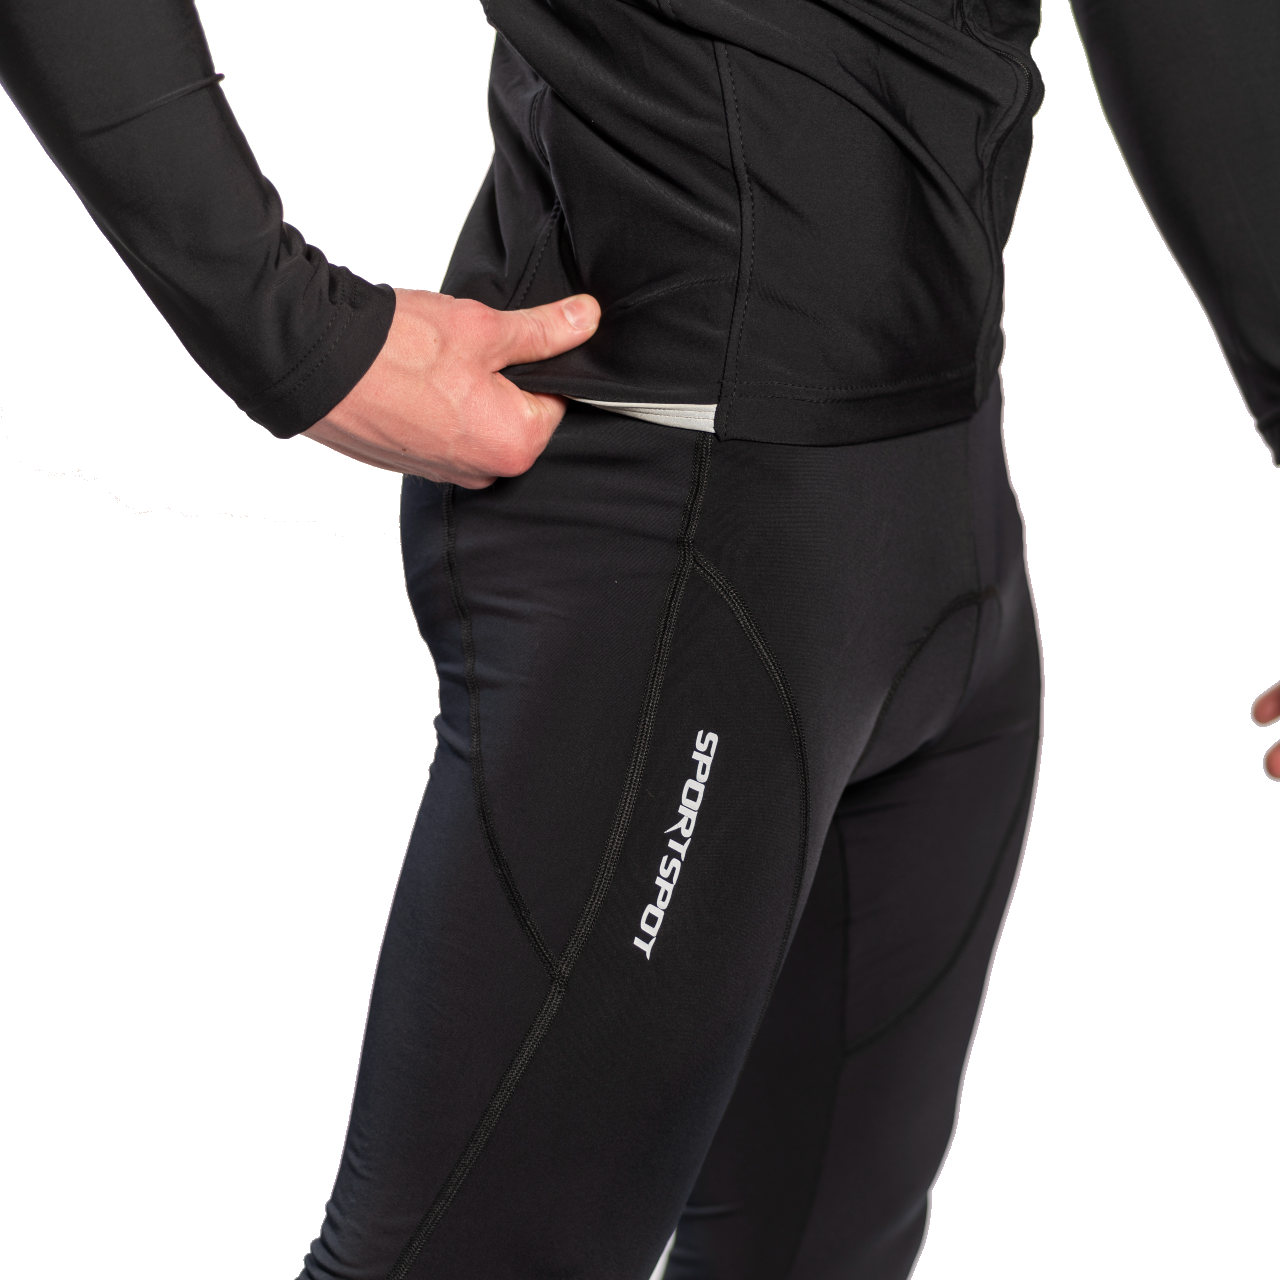 Men Bicycle Tights | Padded Tights for Bicycling | Sportspot – Sportspot LLC